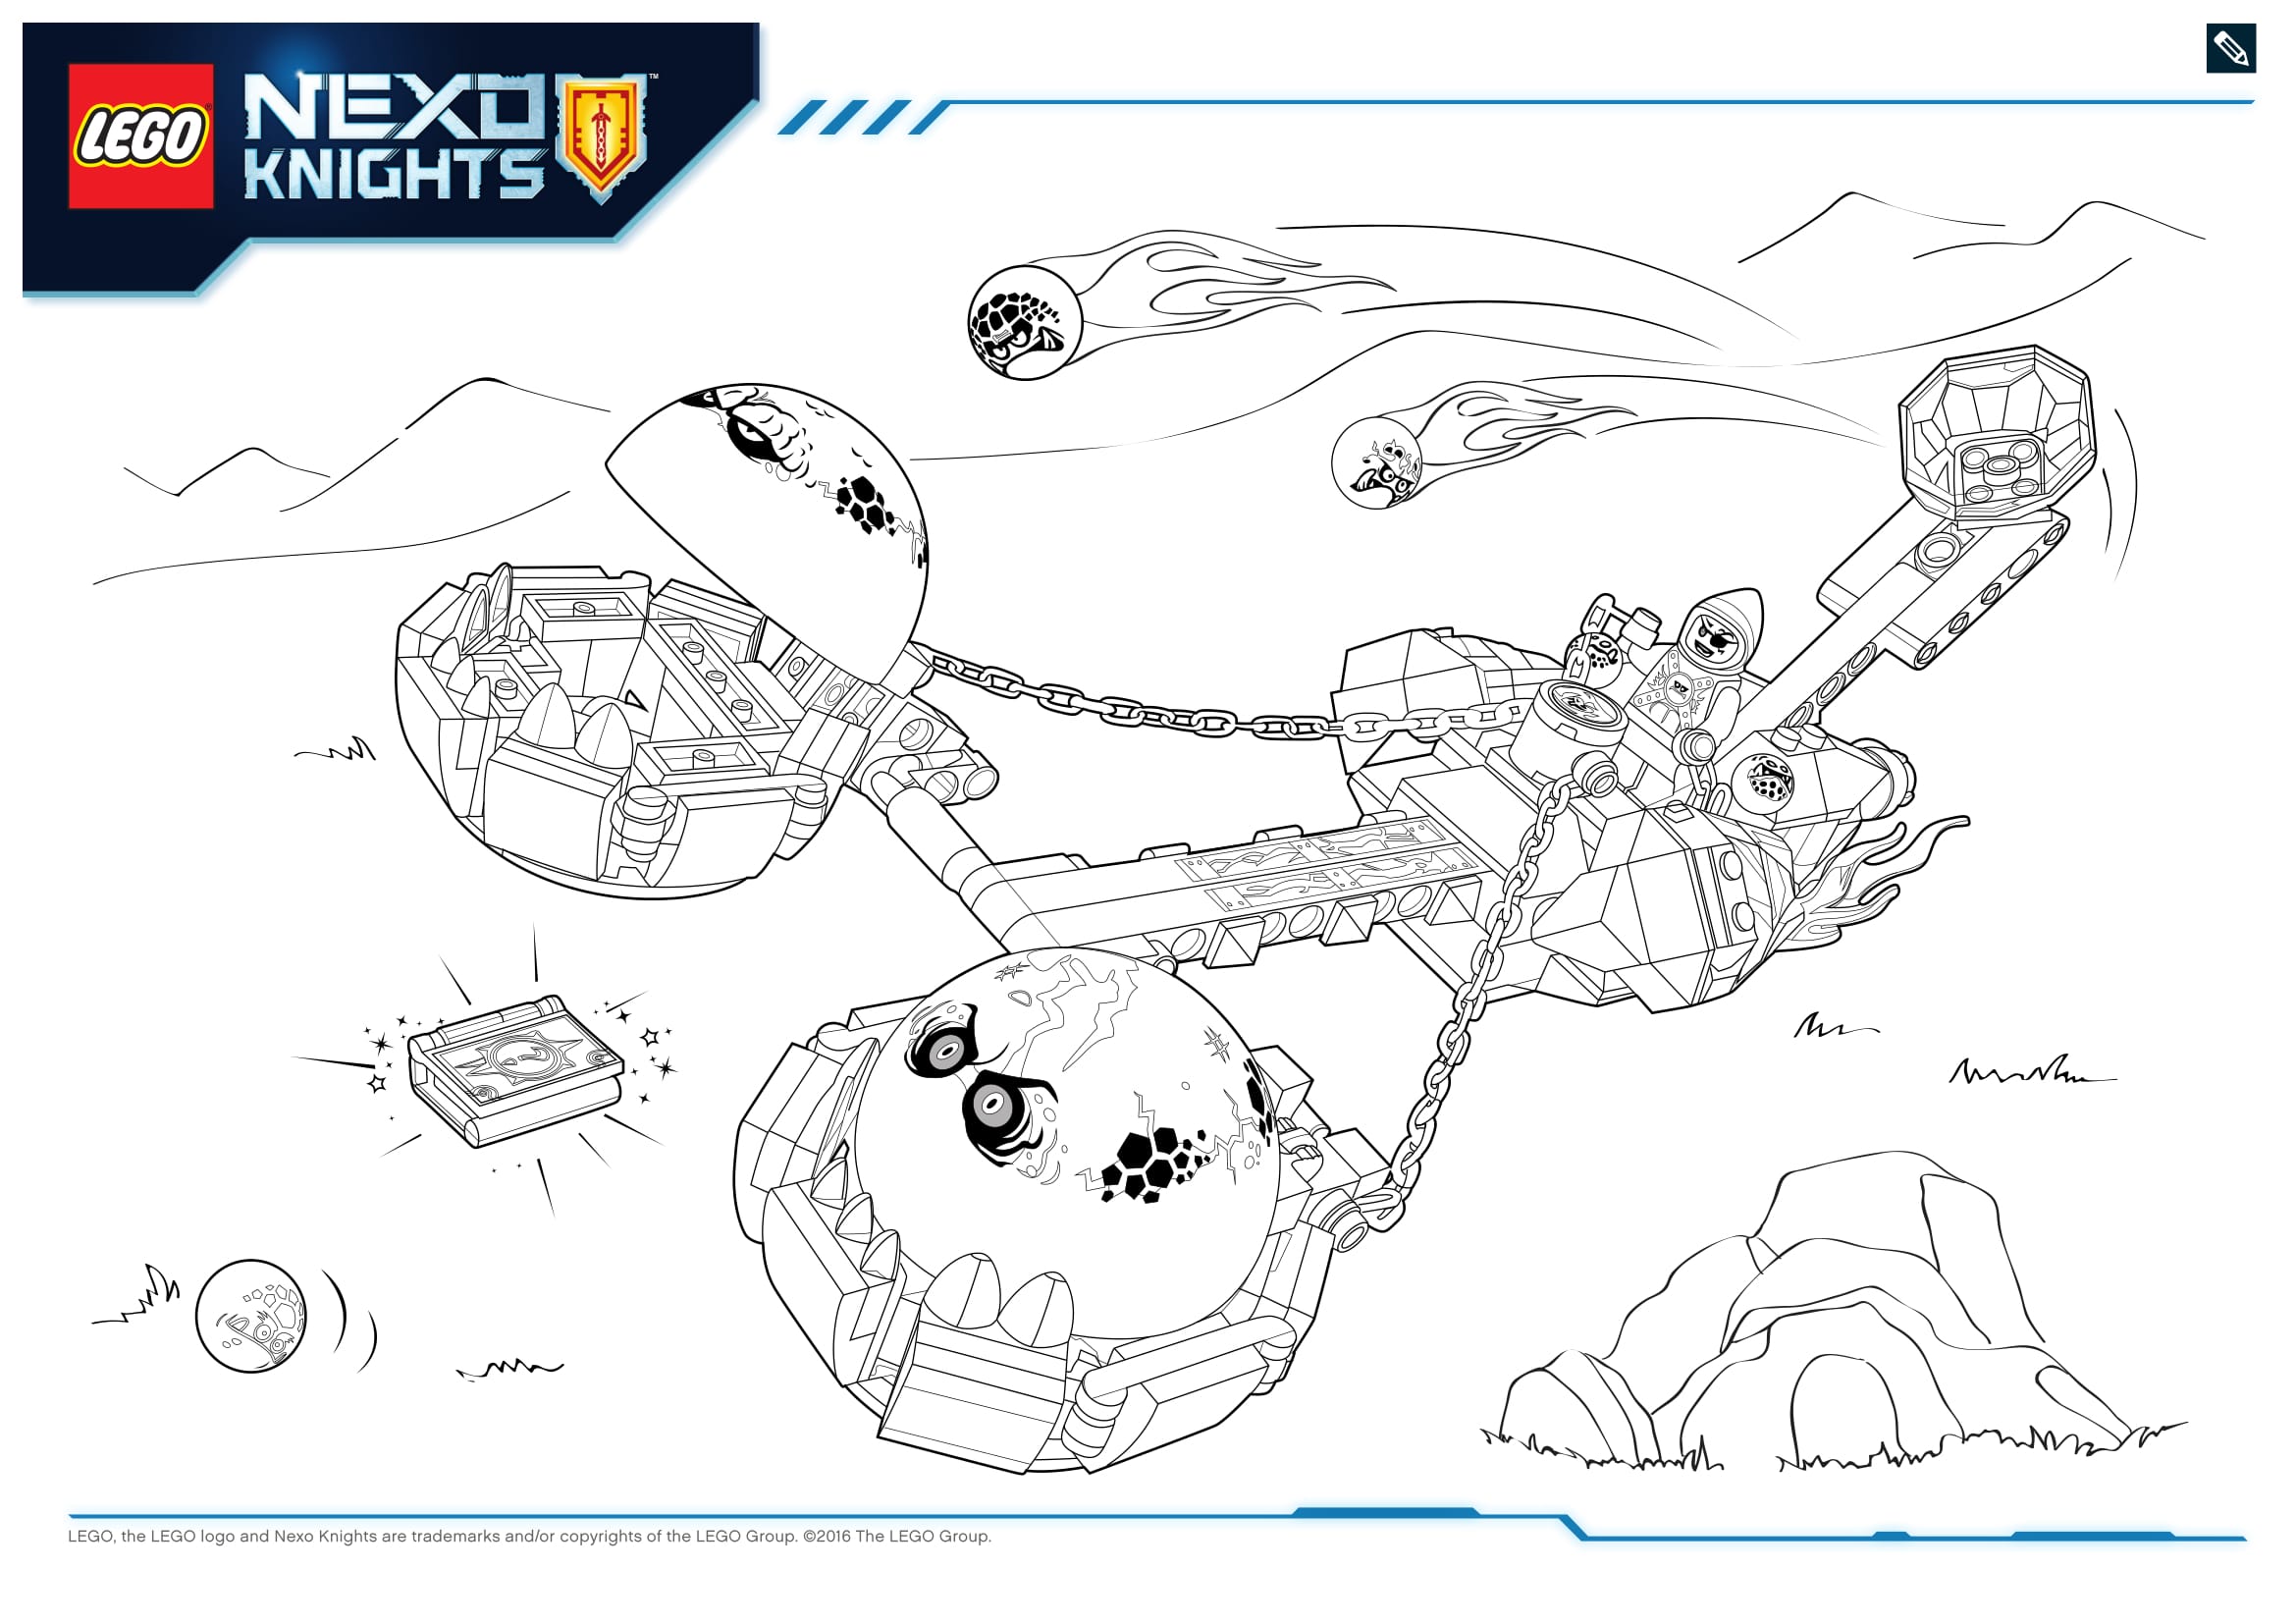 Lego Nexo Knights Monster Productss 2